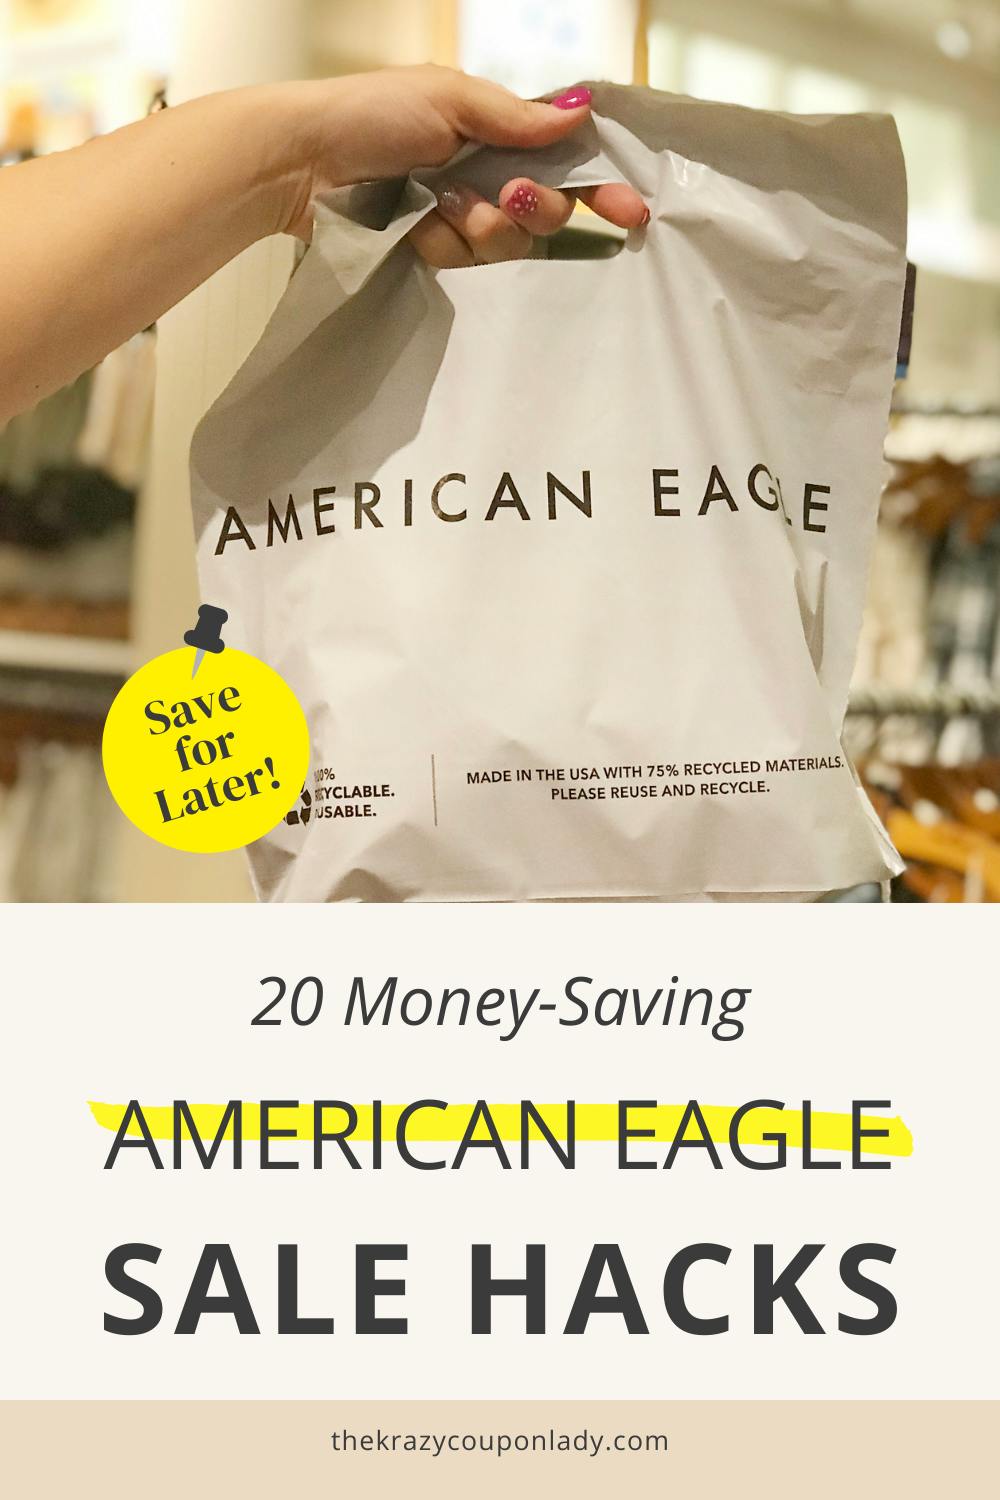 20 American Eagle Sale Hacks That'll Get You Free Jeans